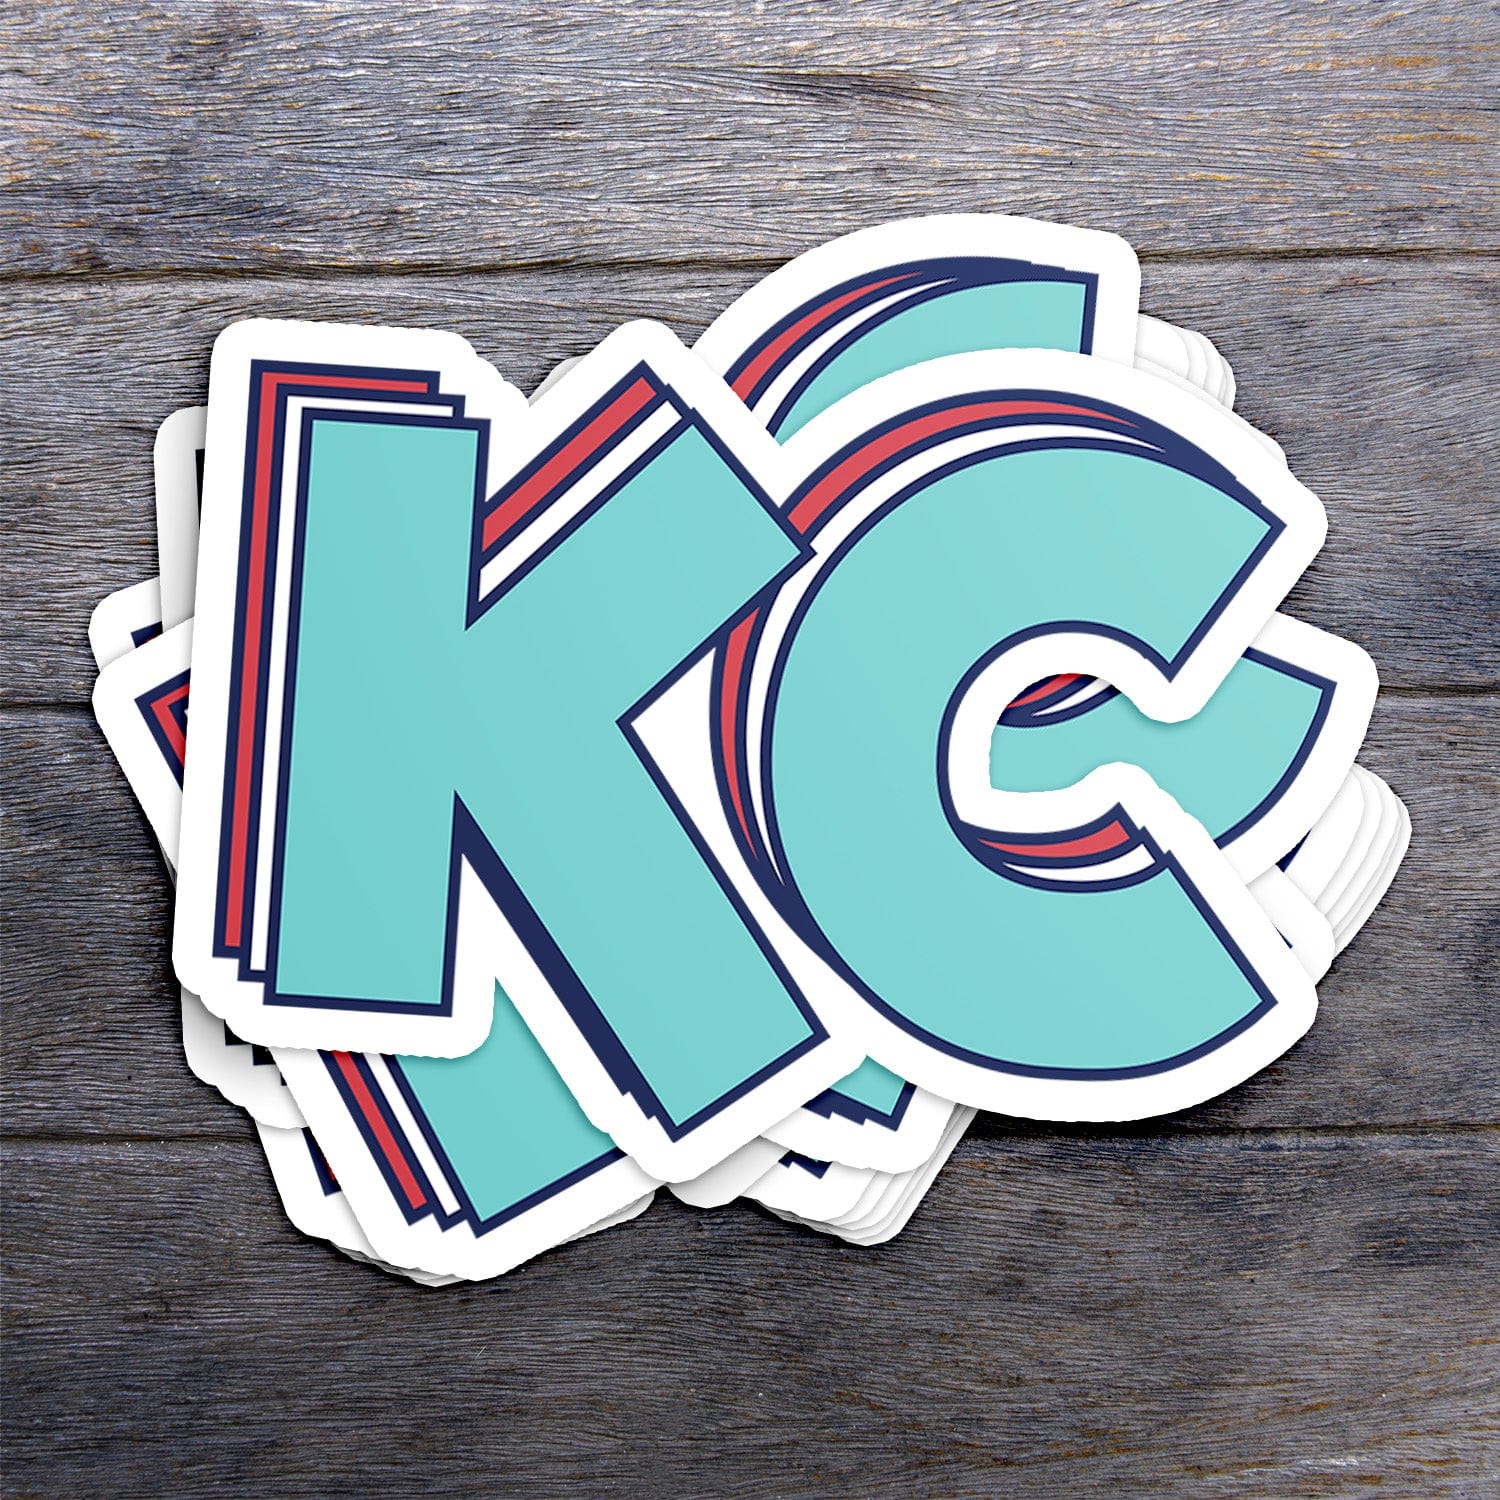 KC Swag Kansas City Current STACKED TEAL KC die-cut sticker decal made from waterproof vinyl stack on dark wood table